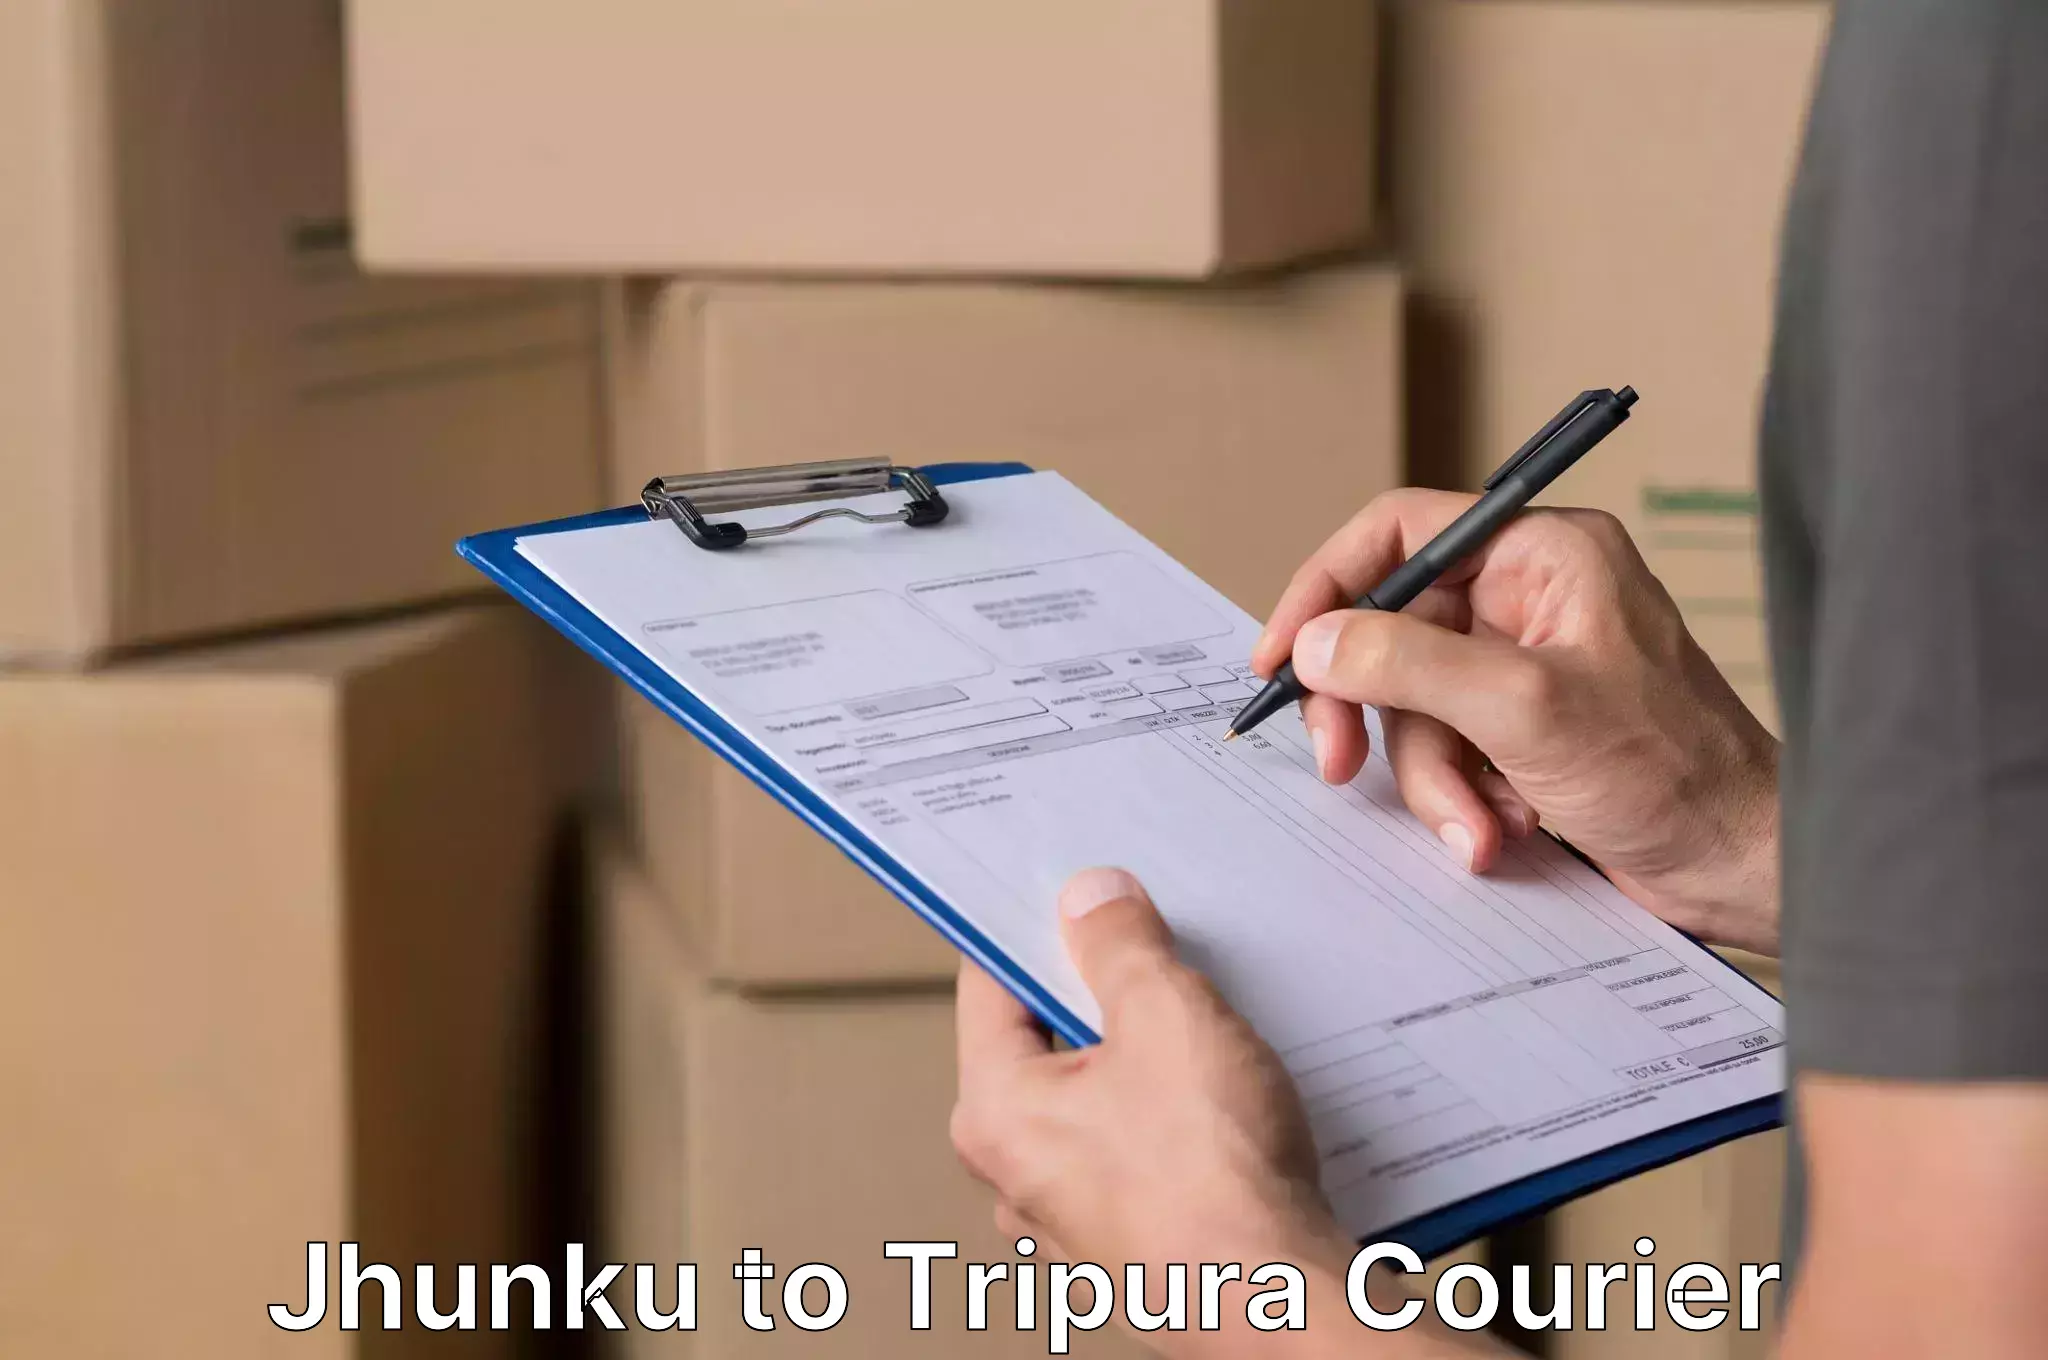 Comprehensive relocation services Jhunku to Udaipur Tripura